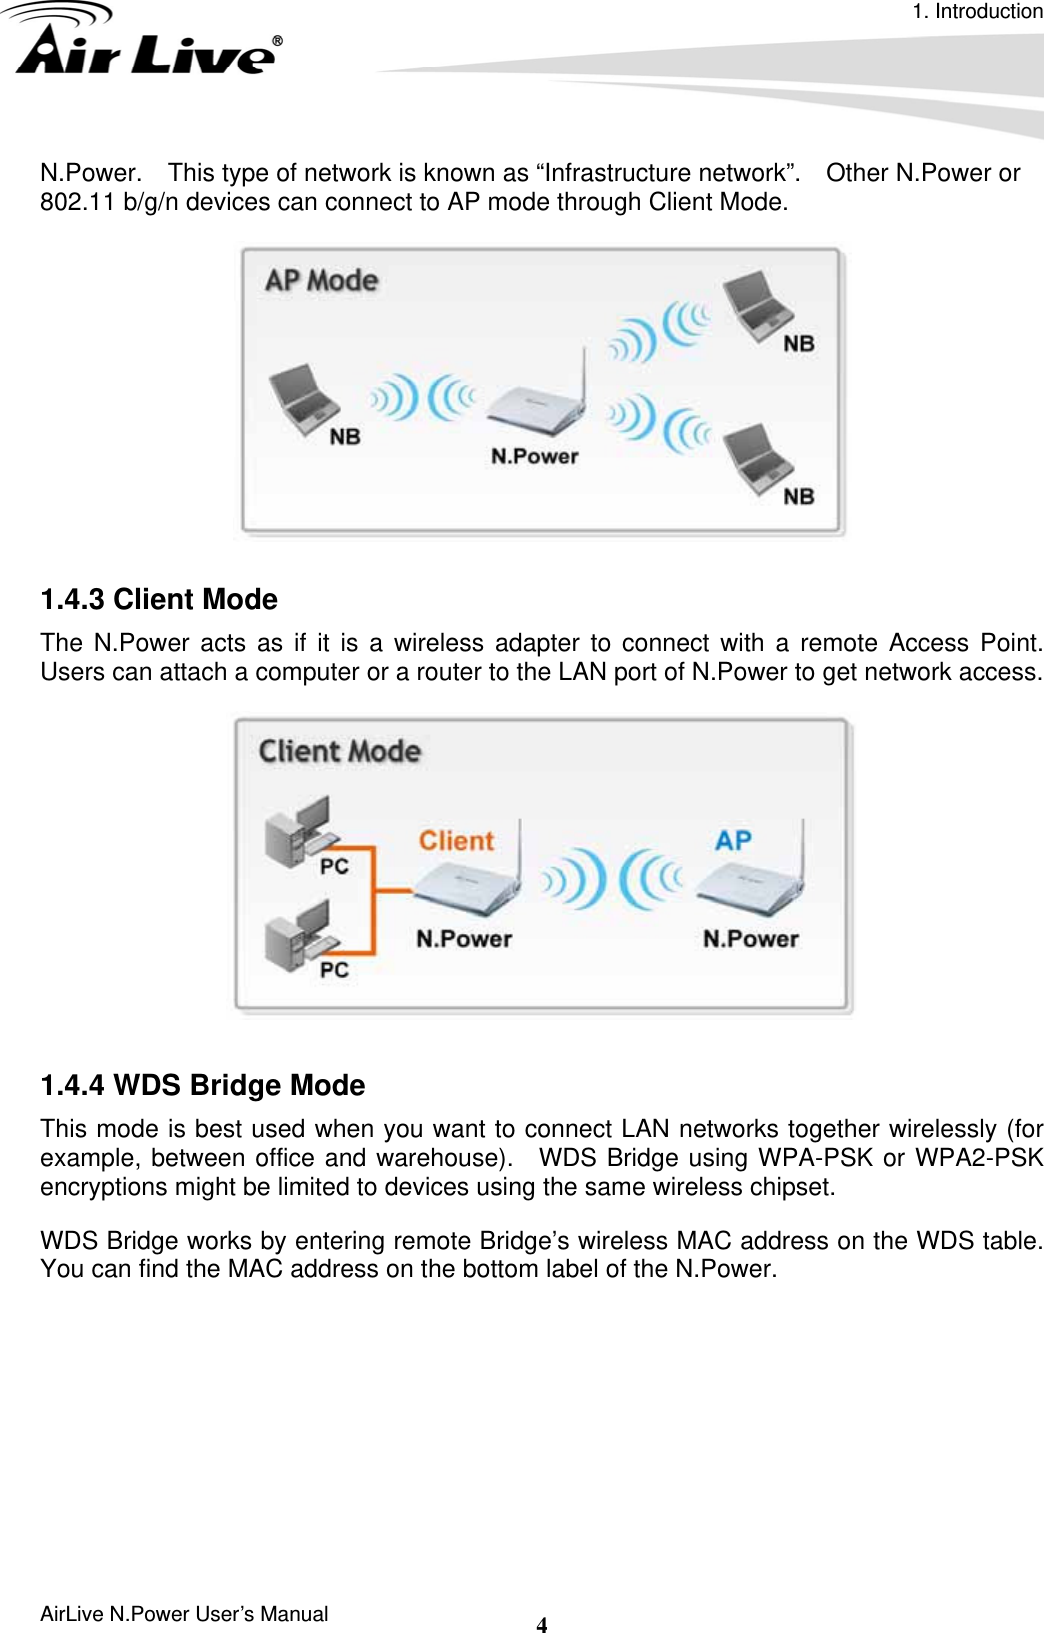 1. Introduction AirLive N.Power User’s Manual  4N.Power.    This type of network is known as “Infrastructure network”.    Other N.Power or 802.11 b/g/n devices can connect to AP mode through Client Mode.   1.4.3 Client Mode   The N.Power acts as if it is a wireless adapter to connect with a remote Access Point.  Users can attach a computer or a router to the LAN port of N.Power to get network access.   1.4.4 WDS Bridge Mode This mode is best used when you want to connect LAN networks together wirelessly (for example, between office and warehouse).  WDS Bridge using WPA-PSK or WPA2-PSK encryptions might be limited to devices using the same wireless chipset. WDS Bridge works by entering remote Bridge’s wireless MAC address on the WDS table.   You can find the MAC address on the bottom label of the N.Power.   